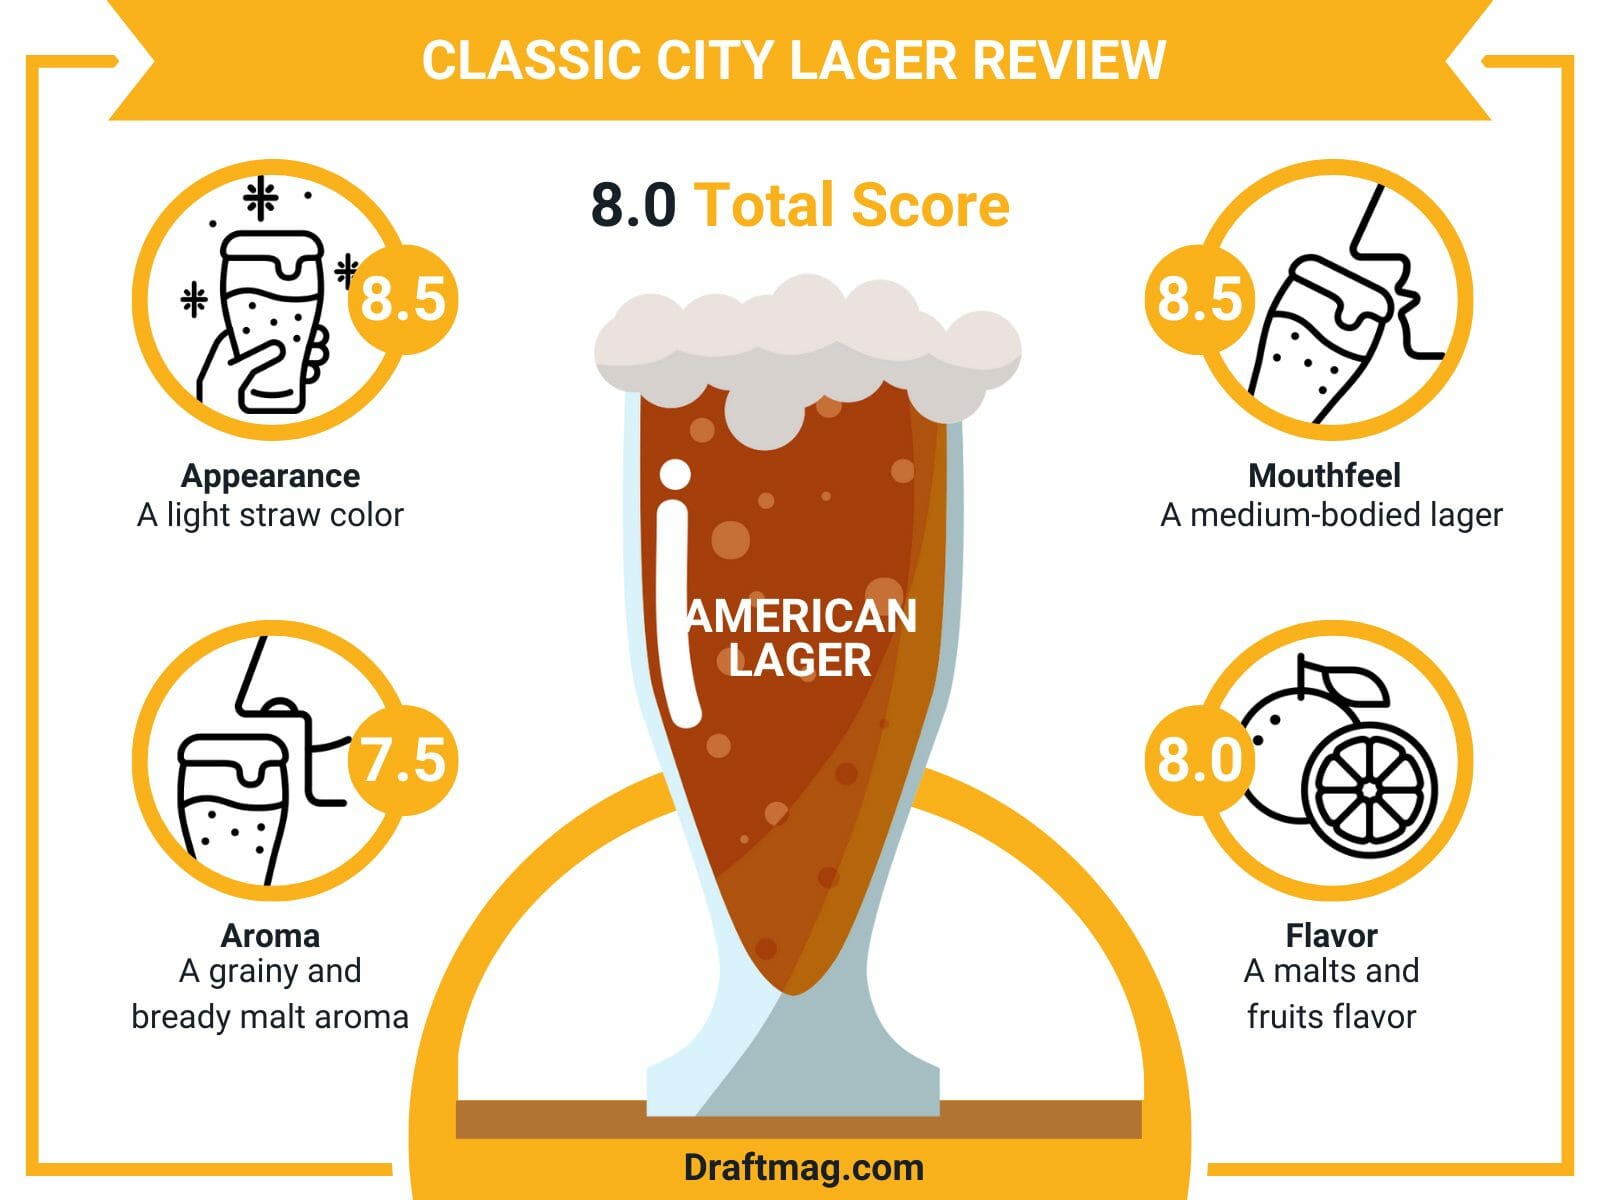 Classic city lager review infographic